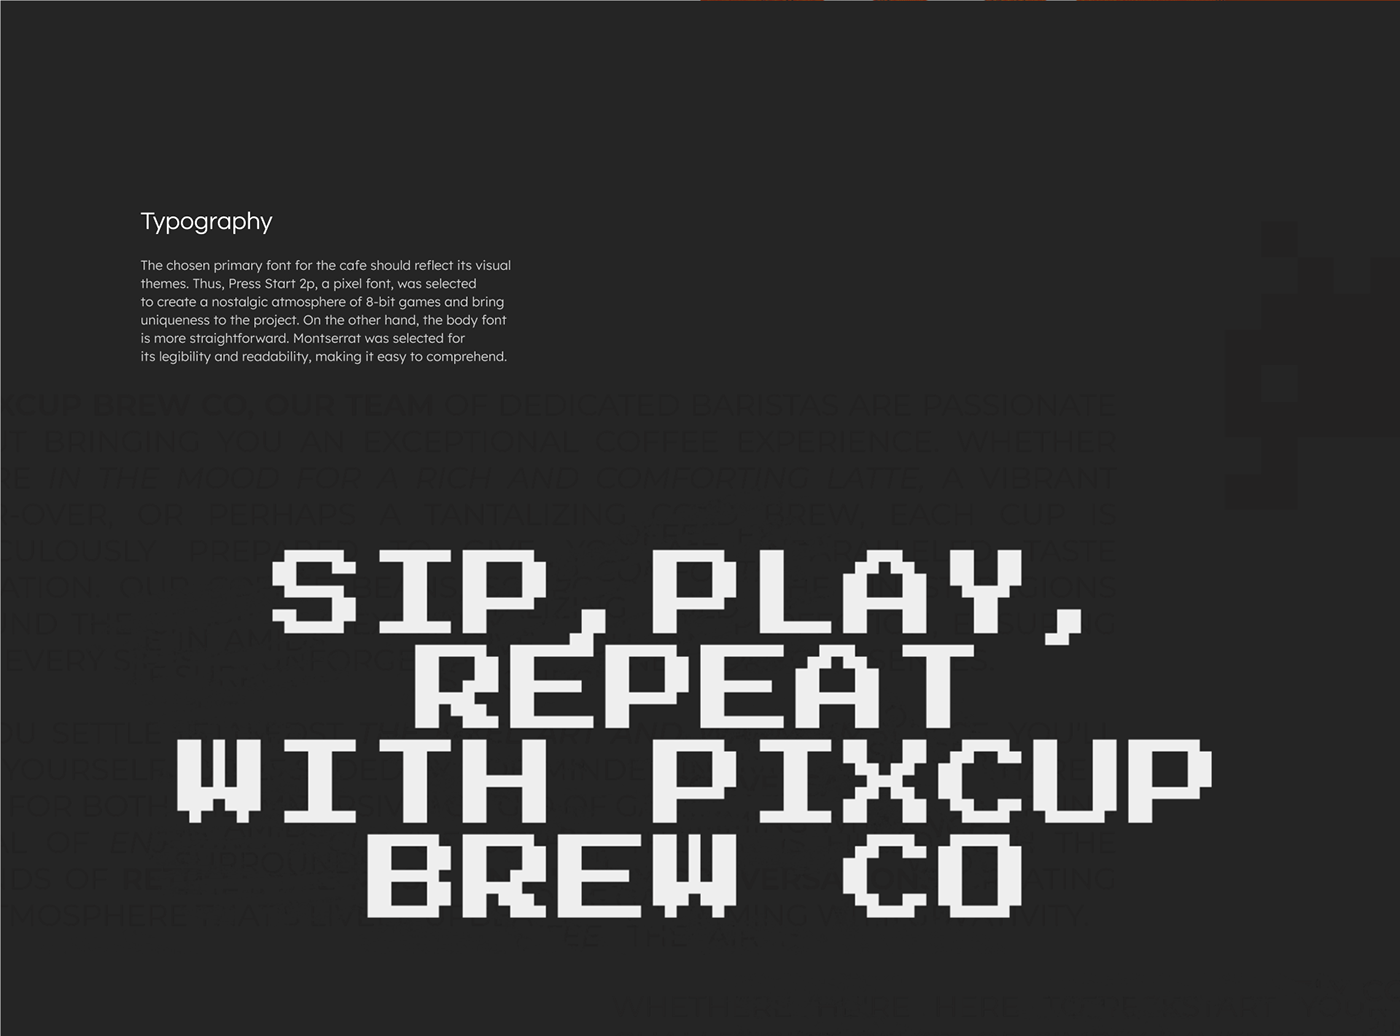 Brand identity development & food packaging design for Pixcup Brew Co coffeeshop